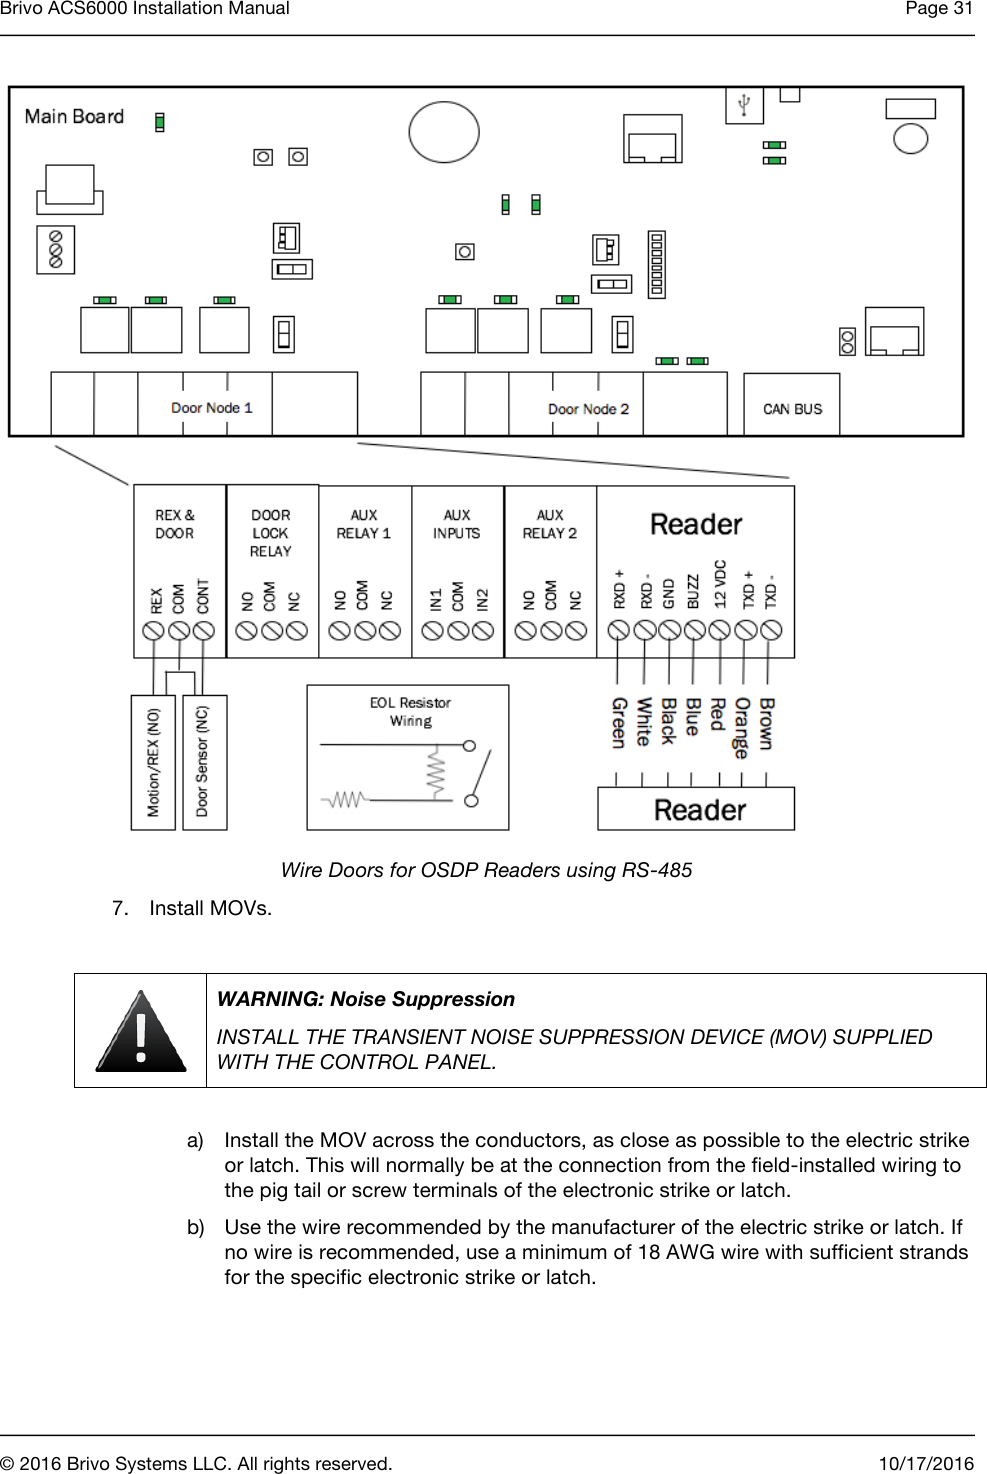 Brivo ACS6000 Installation Manual Page 31      © 2016 Brivo Systems LLC. All rights reserved. 10/17/2016   Wire Doors for OSDP Readers using RS-485 7. Install MOVs.   WARNING: Noise Suppression INSTALL THE TRANSIENT NOISE SUPPRESSION DEVICE (MOV) SUPPLIED WITH THE CONTROL PANEL.  a) Install the MOV across the conductors, as close as possible to the electric strike or latch. This will normally be at the connection from the field-installed wiring to the pig tail or screw terminals of the electronic strike or latch. b) Use the wire recommended by the manufacturer of the electric strike or latch. If no wire is recommended, use a minimum of 18 AWG wire with sufficient strands for the specific electronic strike or latch. 